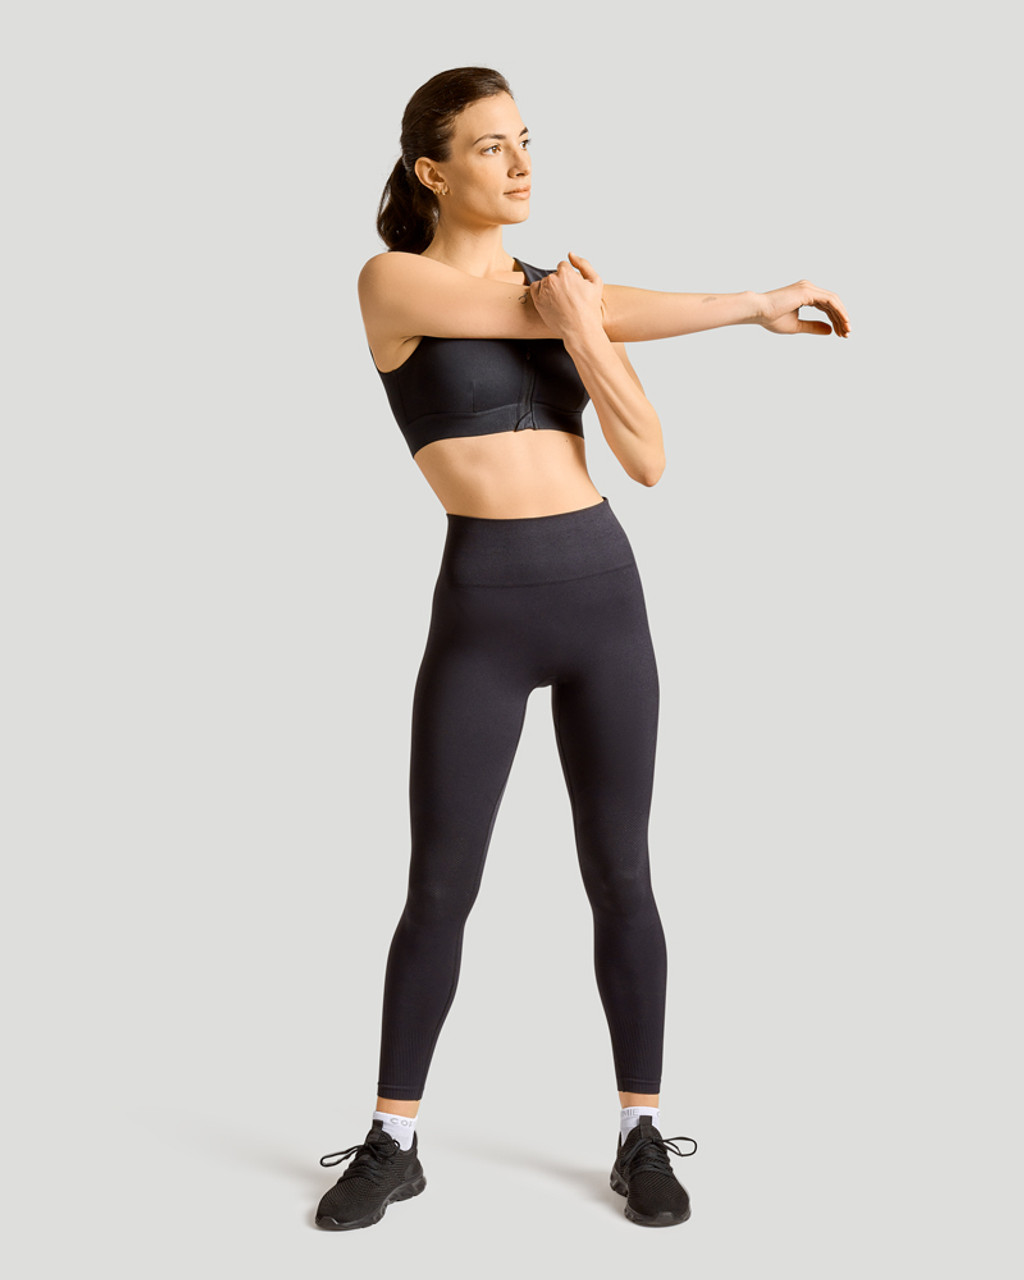 Copper Infused Leggings - Spectral Body - Copper Fabric Activewear